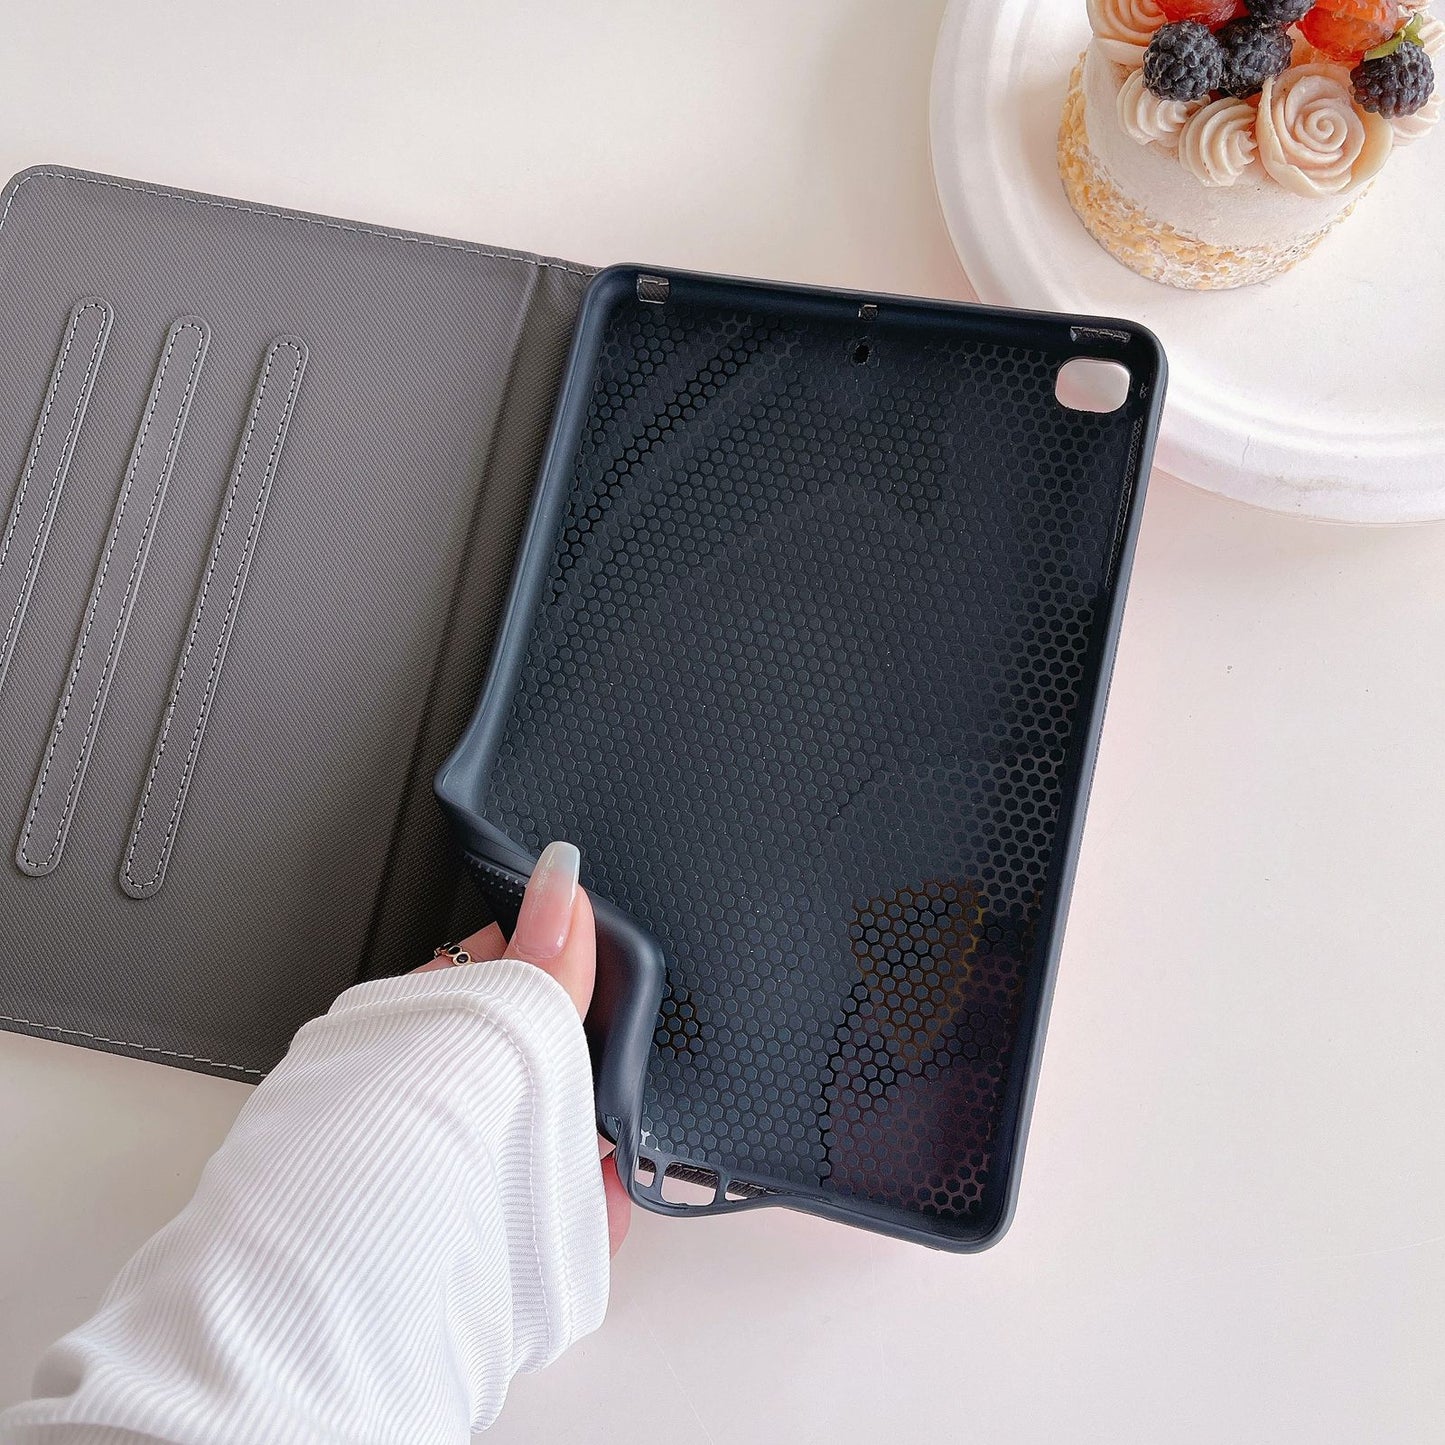 Good Day Designer  PU Leather Finish Black Foldable Flip Case for iPad 10.9 (Air4 & Air5) / Pro 11 inches